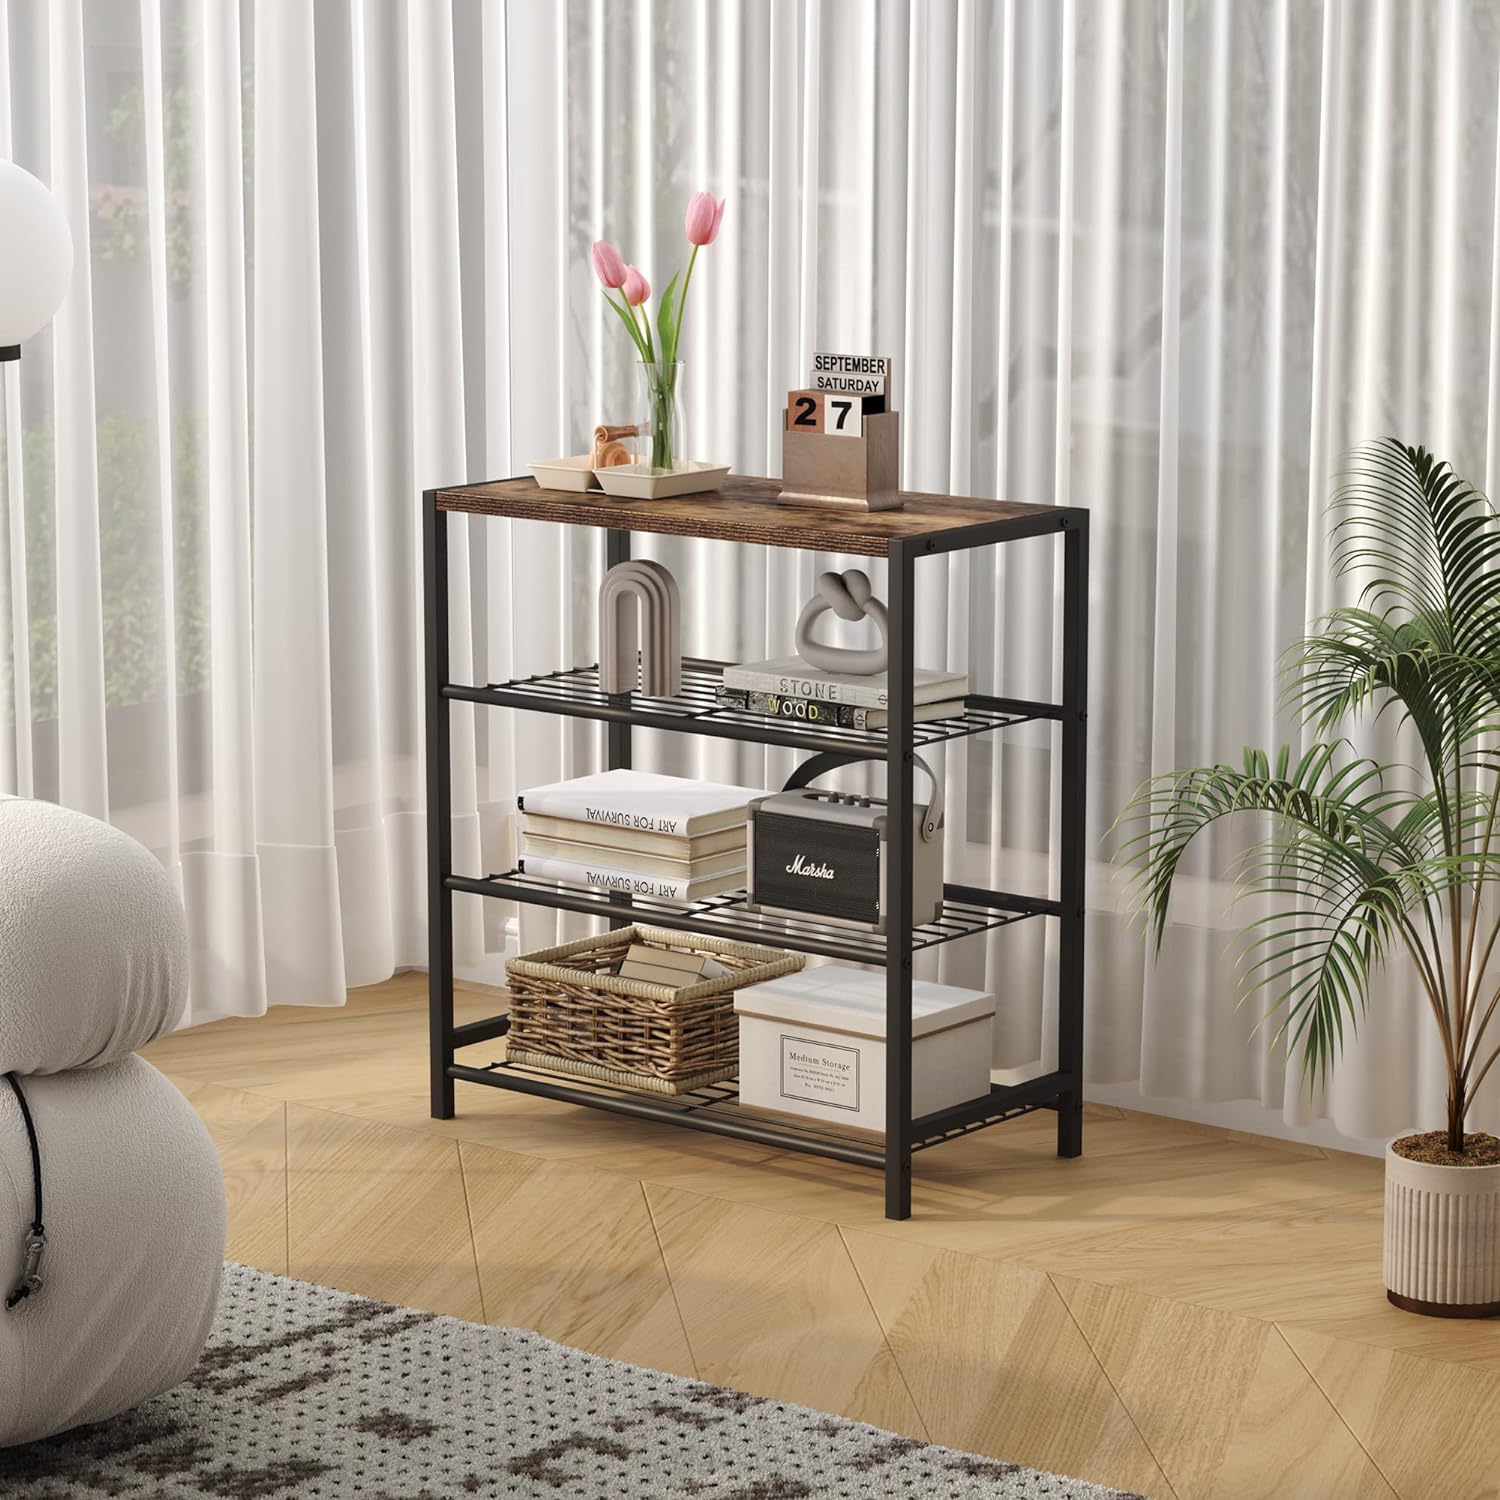 https://bigbigmart.com/wp-content/uploads/2023/12/HOMEFORT-4-Tier-Metal-Shoe-Rack-All-Metal-Shoe-TowerShoe-Storage-Shelf-with-MDF-Top-BoardEach-Tier-Fits-3-Pairs-of-ShoesEntryway-Shoes-Organizer-with-Sturdy-Metal-Shelves-.Rustic-Brown8.jpg